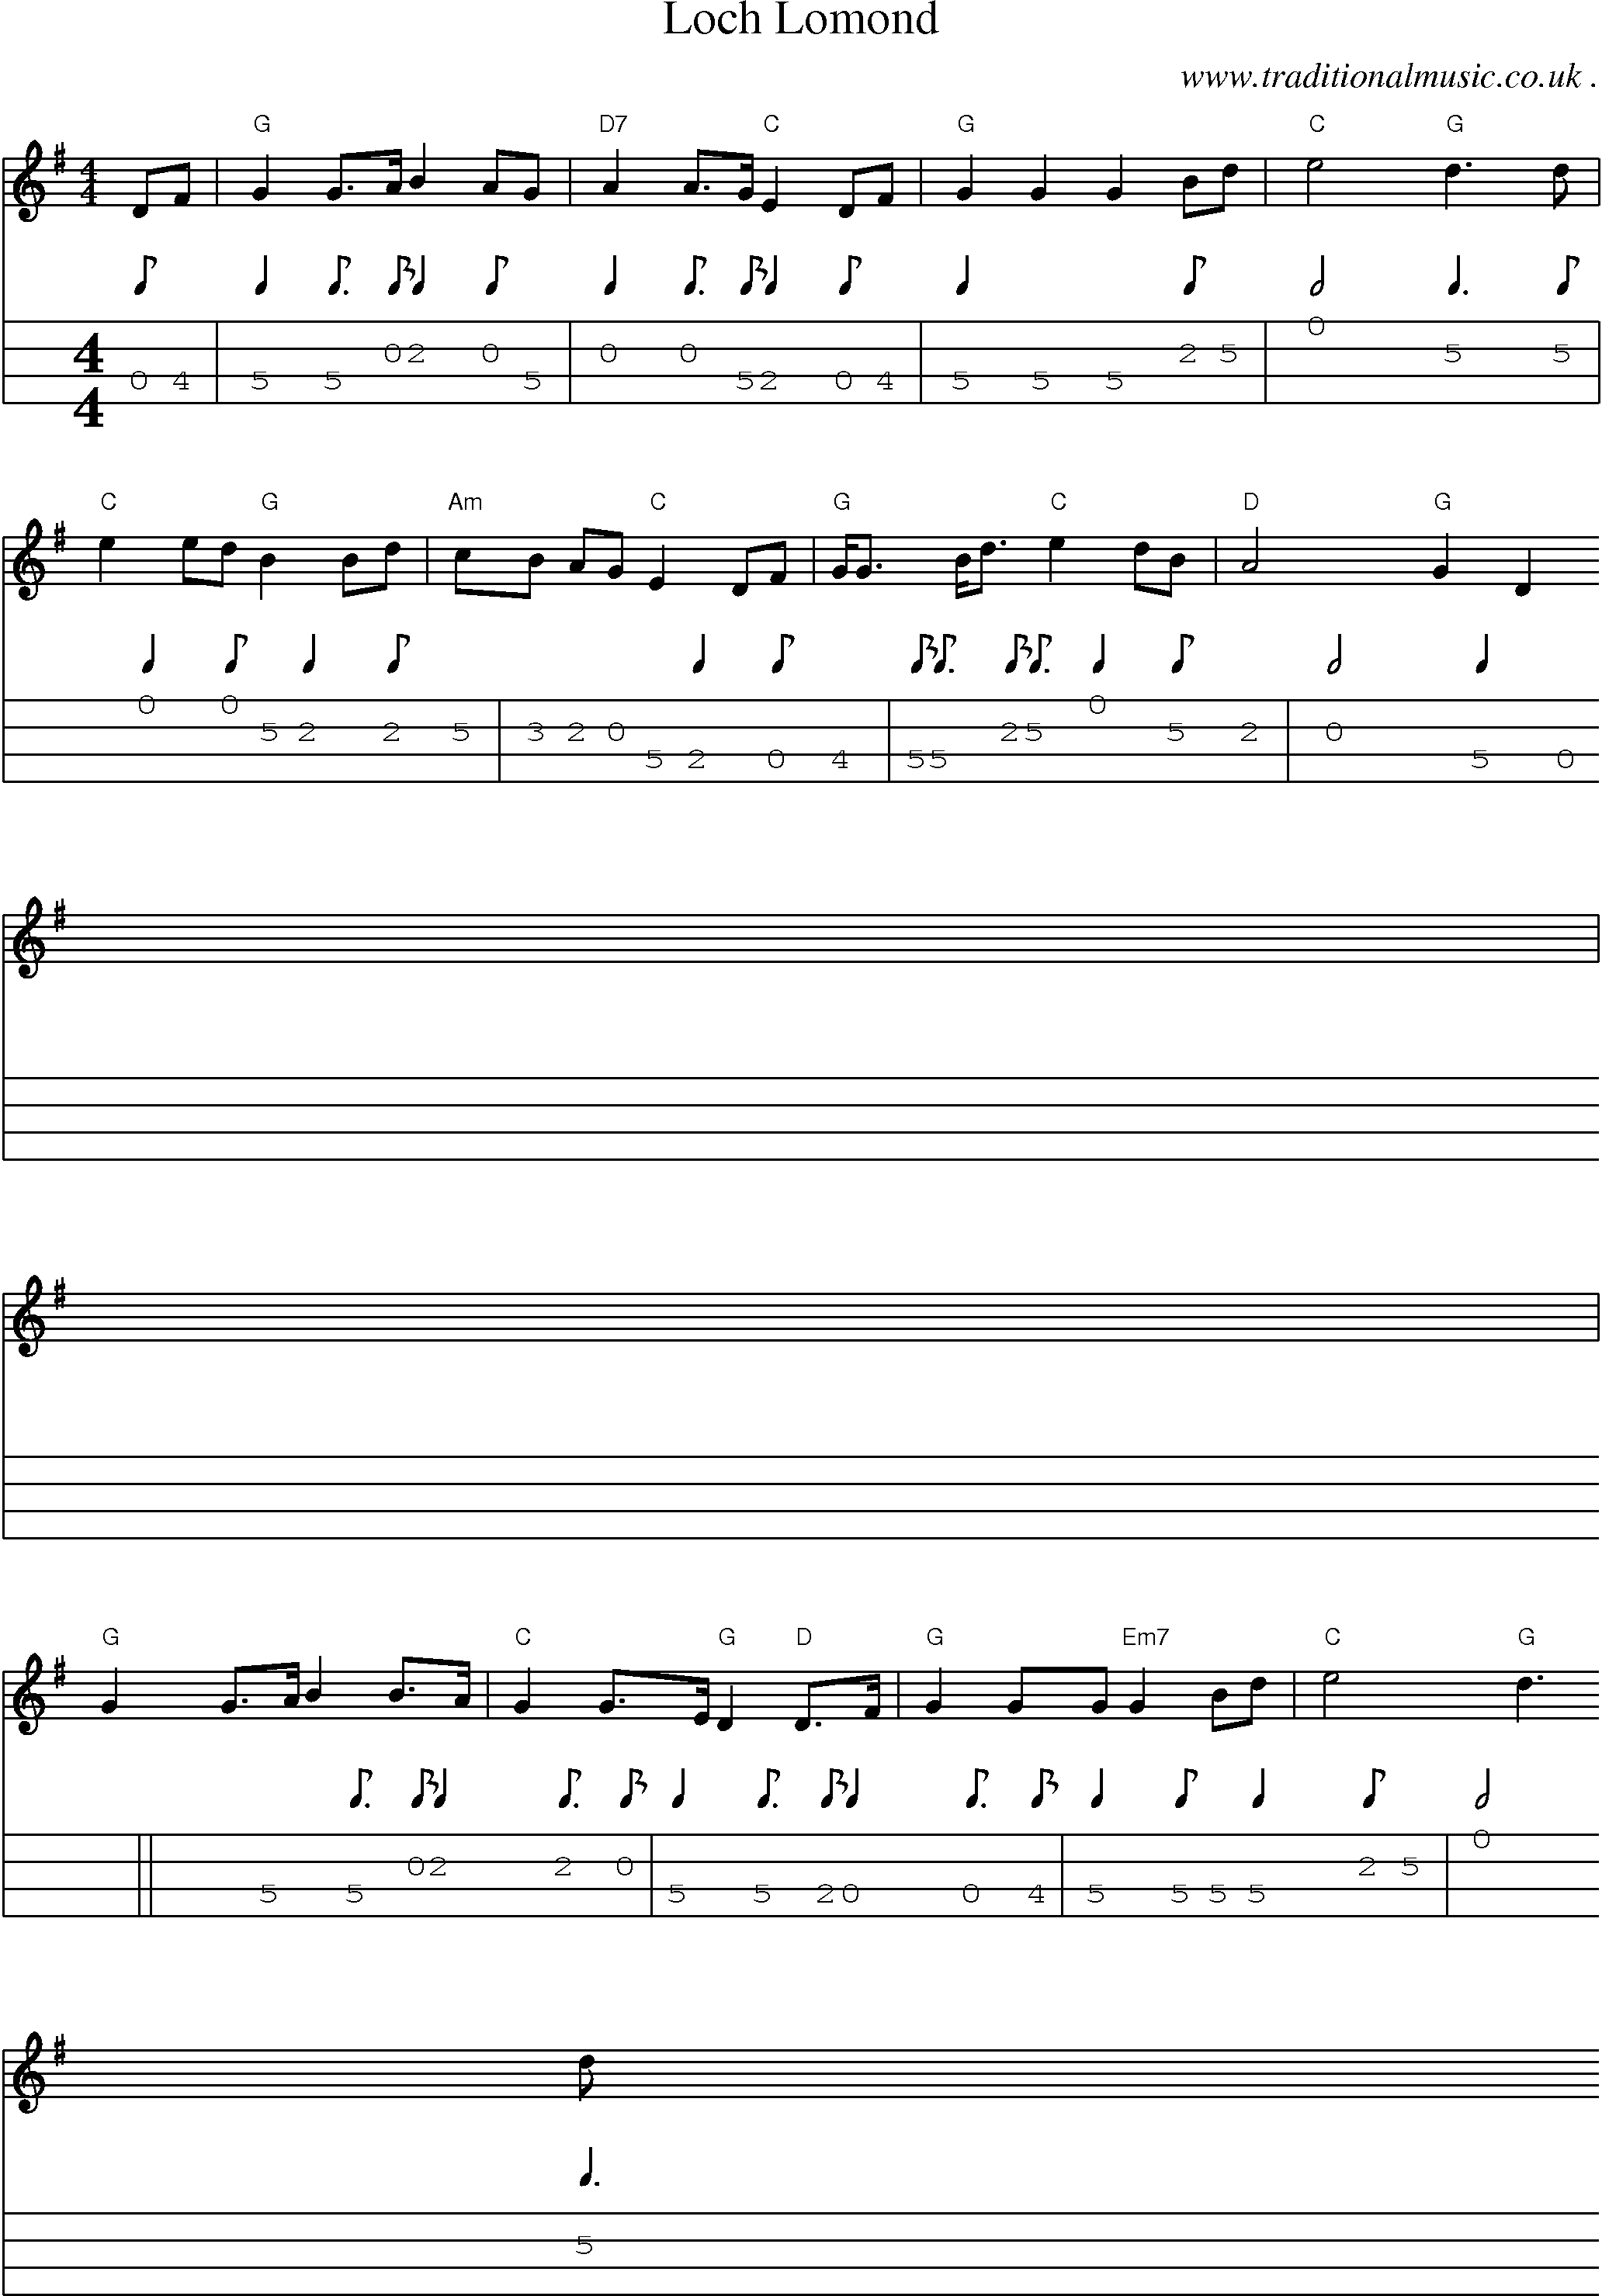 Sheet-music  score, Chords and Mandolin Tabs for Loch Lomond